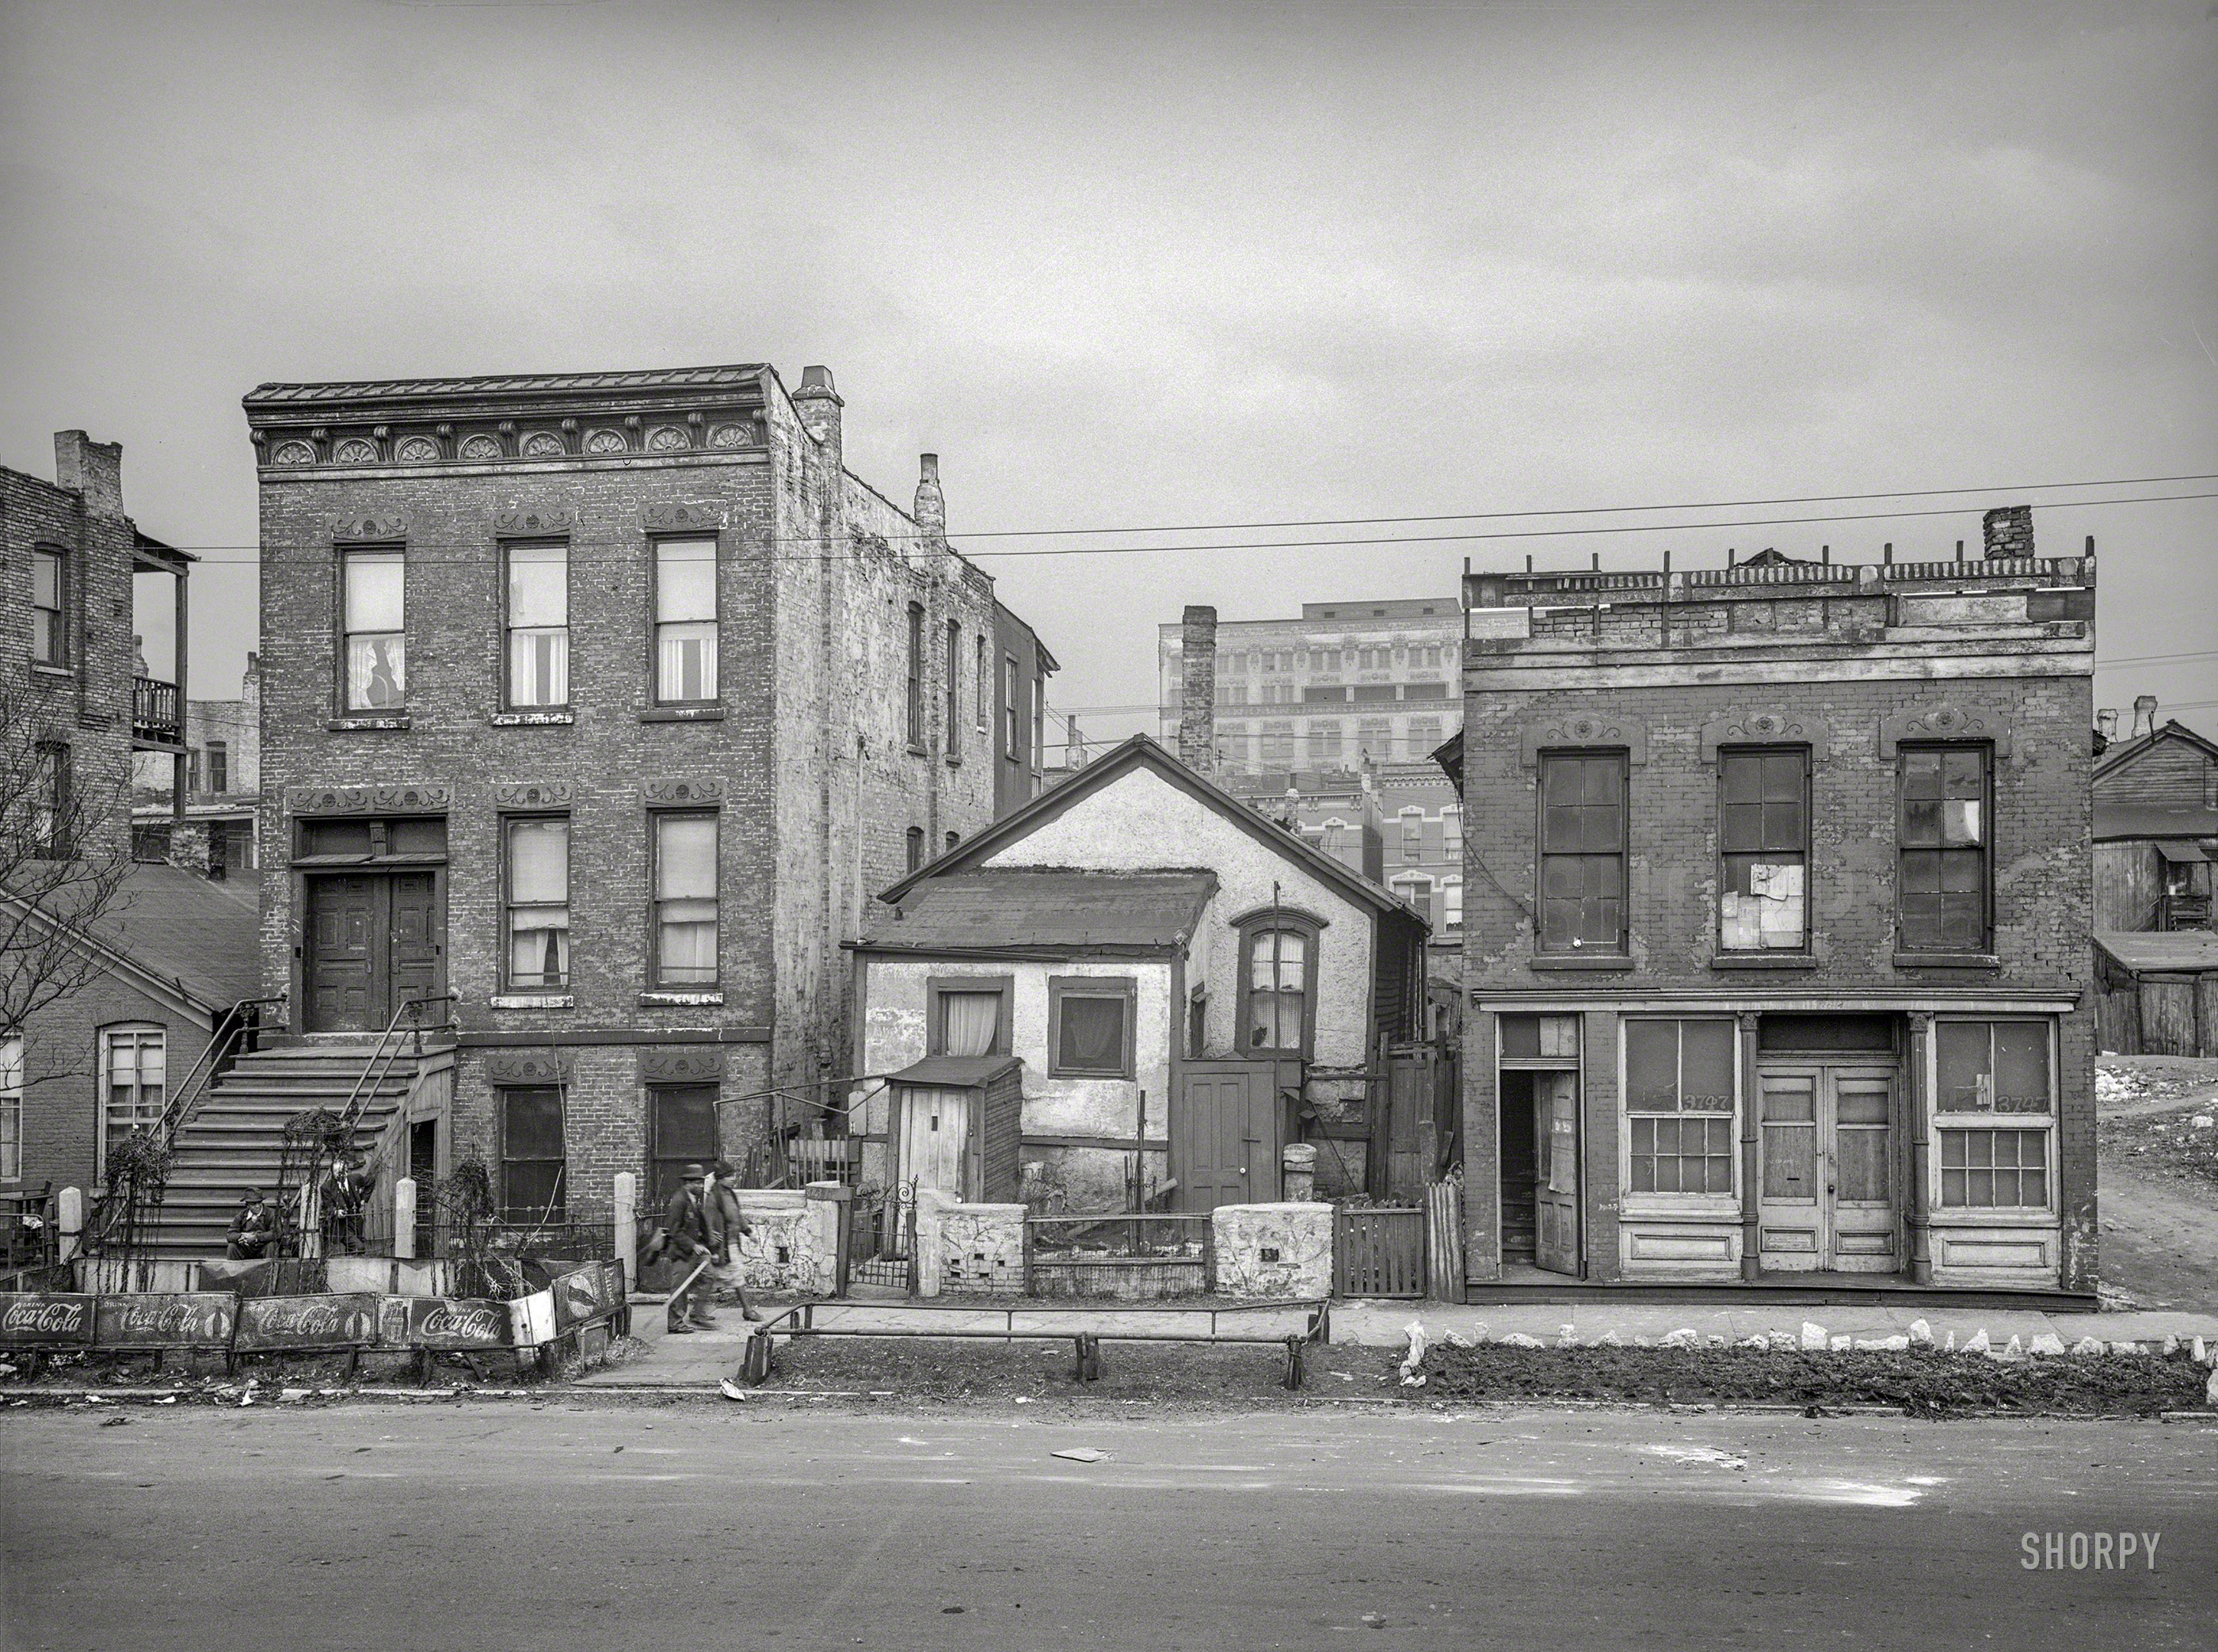 April 1941. "Scene in Negro section of Chicago, Illinois." Photographer Russell Lee's exploration of the South Side enclave known as Bronzeville continues with this stop at a garden plot fenced by Coca-Cola signs. View full size.